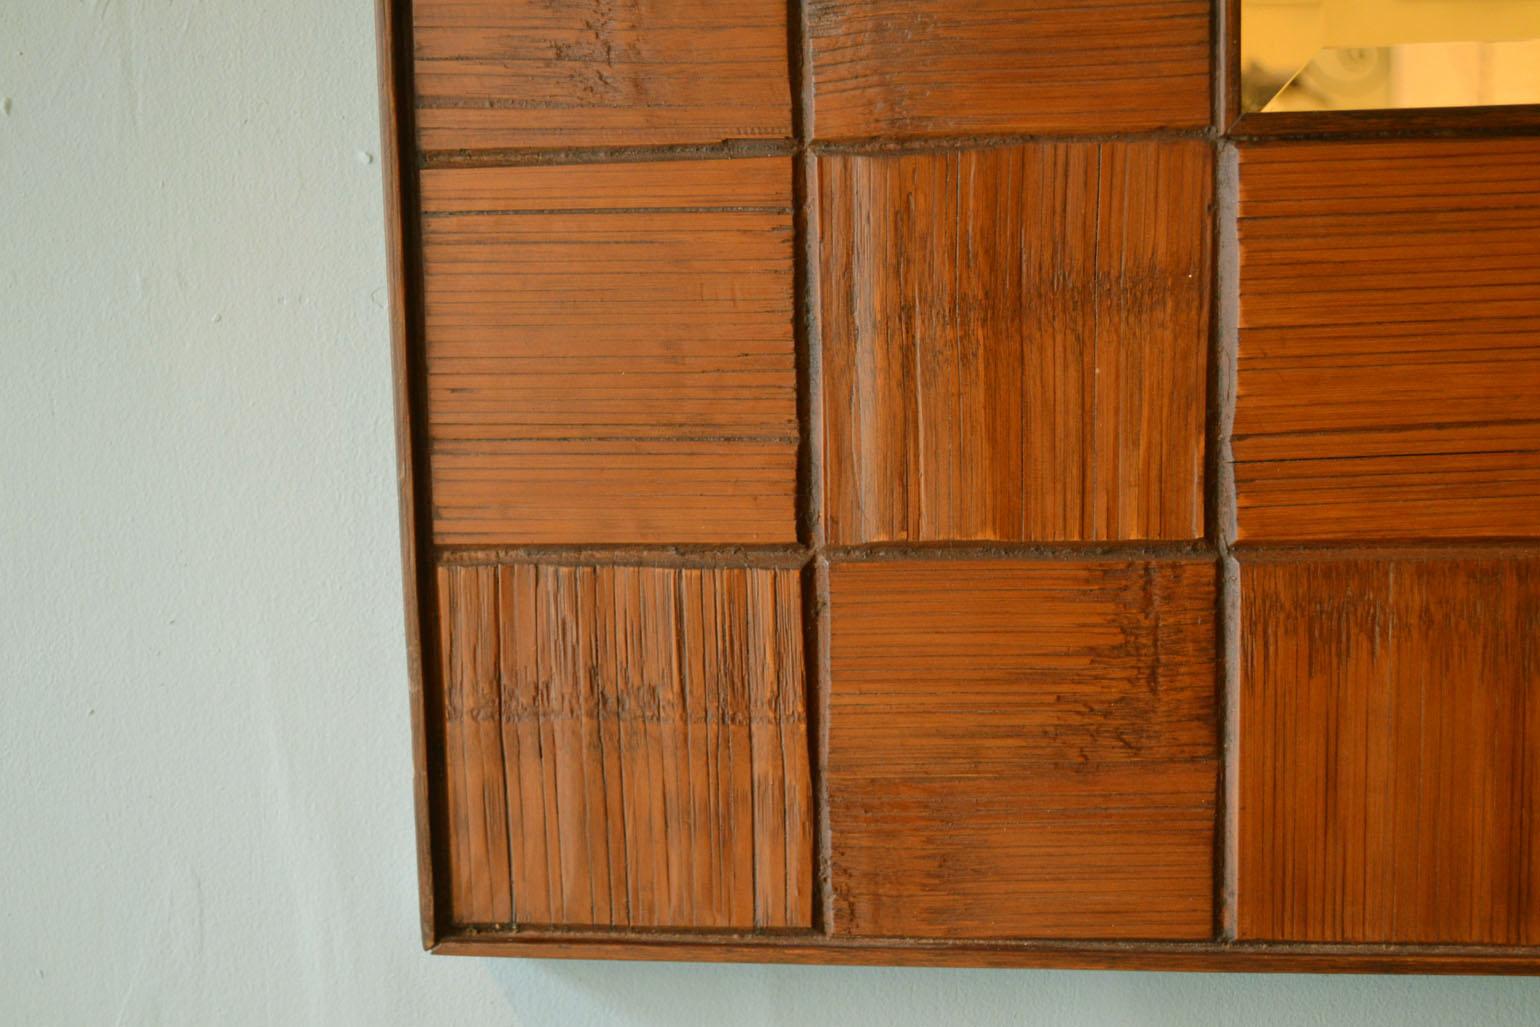 Hand-Carved Square Mirrors Pair with Walnut Wood Relief Border, 1960s, Italy For Sale